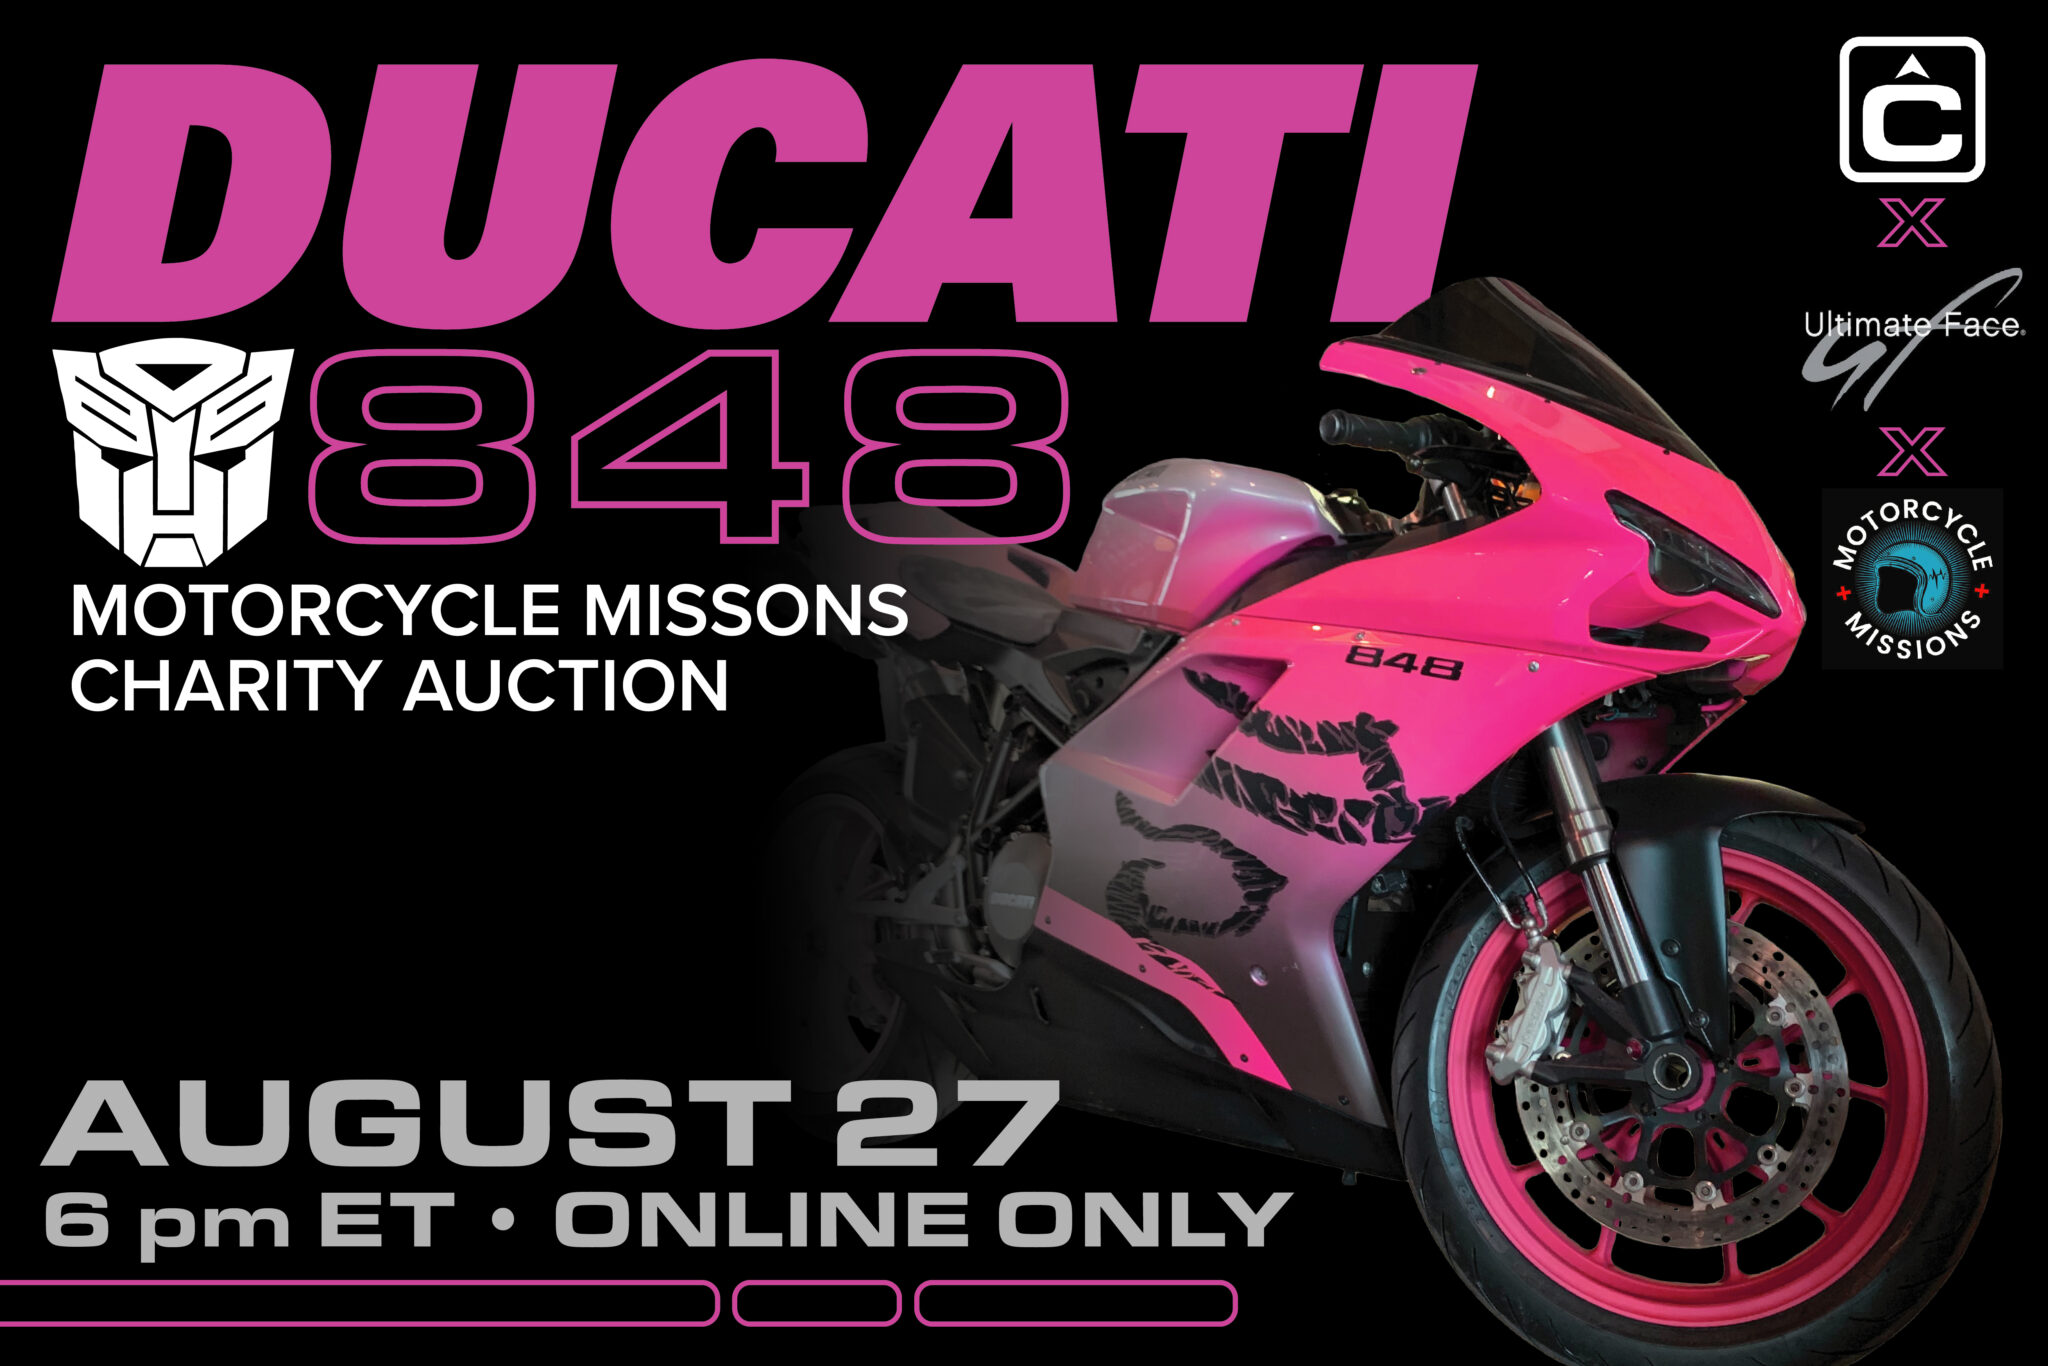 Ducati 848 sold at auction for Motorcycle Missions Charity Auction